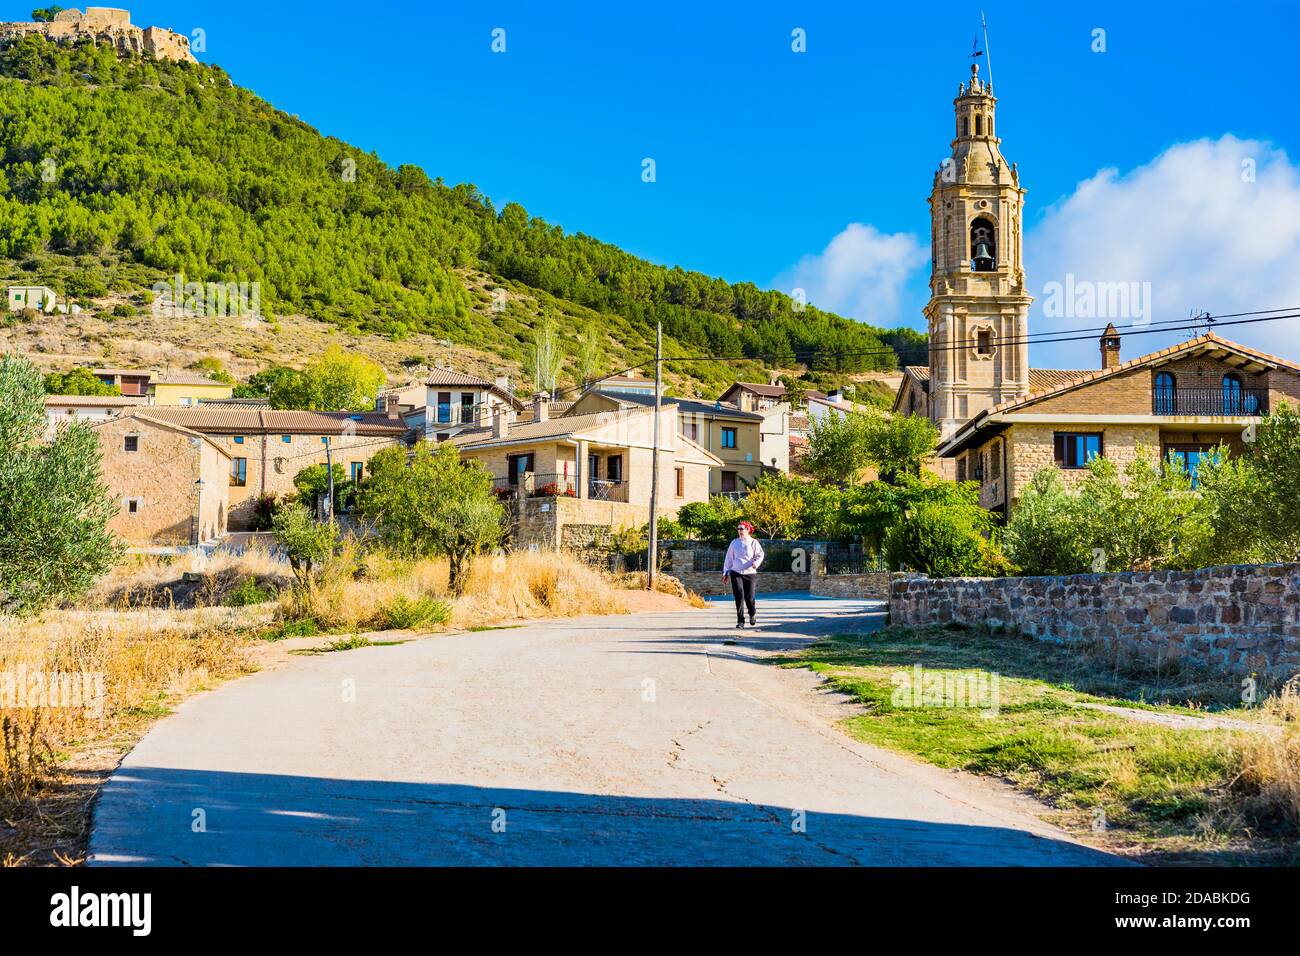 Villamayor de Monjardín, Highlighting the bell tower of the Church of St. Andrew the Apostle. Villamayor de Monjardín, Navarre, Spain, Europe Stock Photo